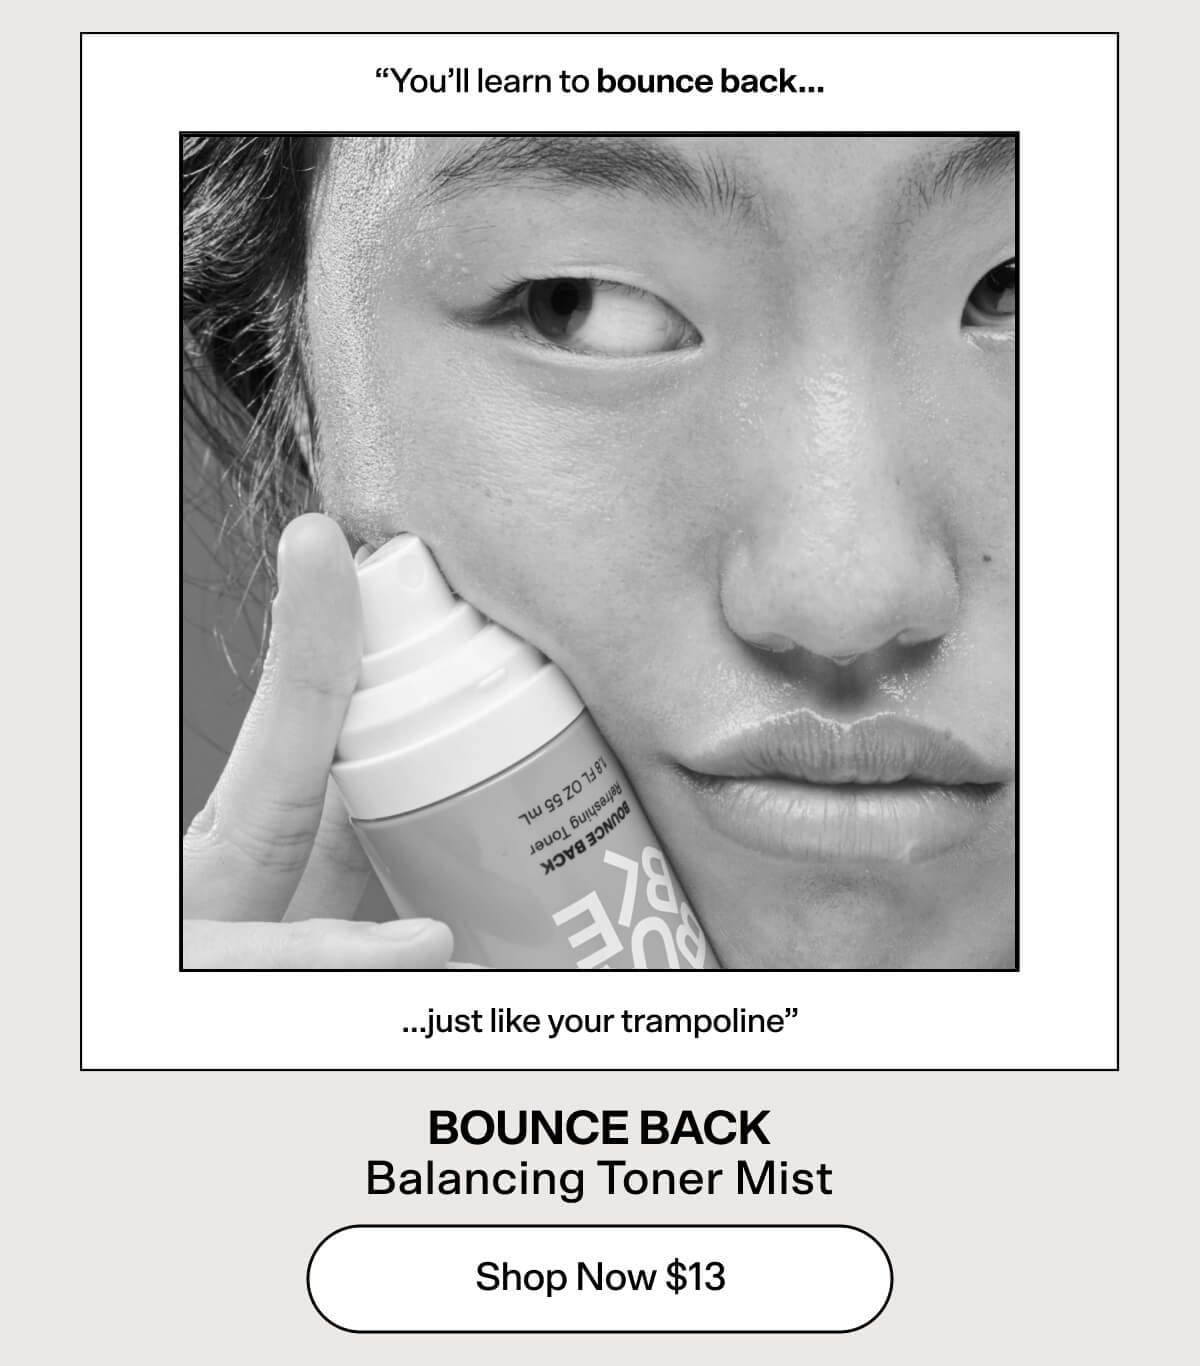 “You’ll learn to bounce back...just like your trampoline" BOUNCE BACK Balancing Toner Mist [Shop Now \\$13]